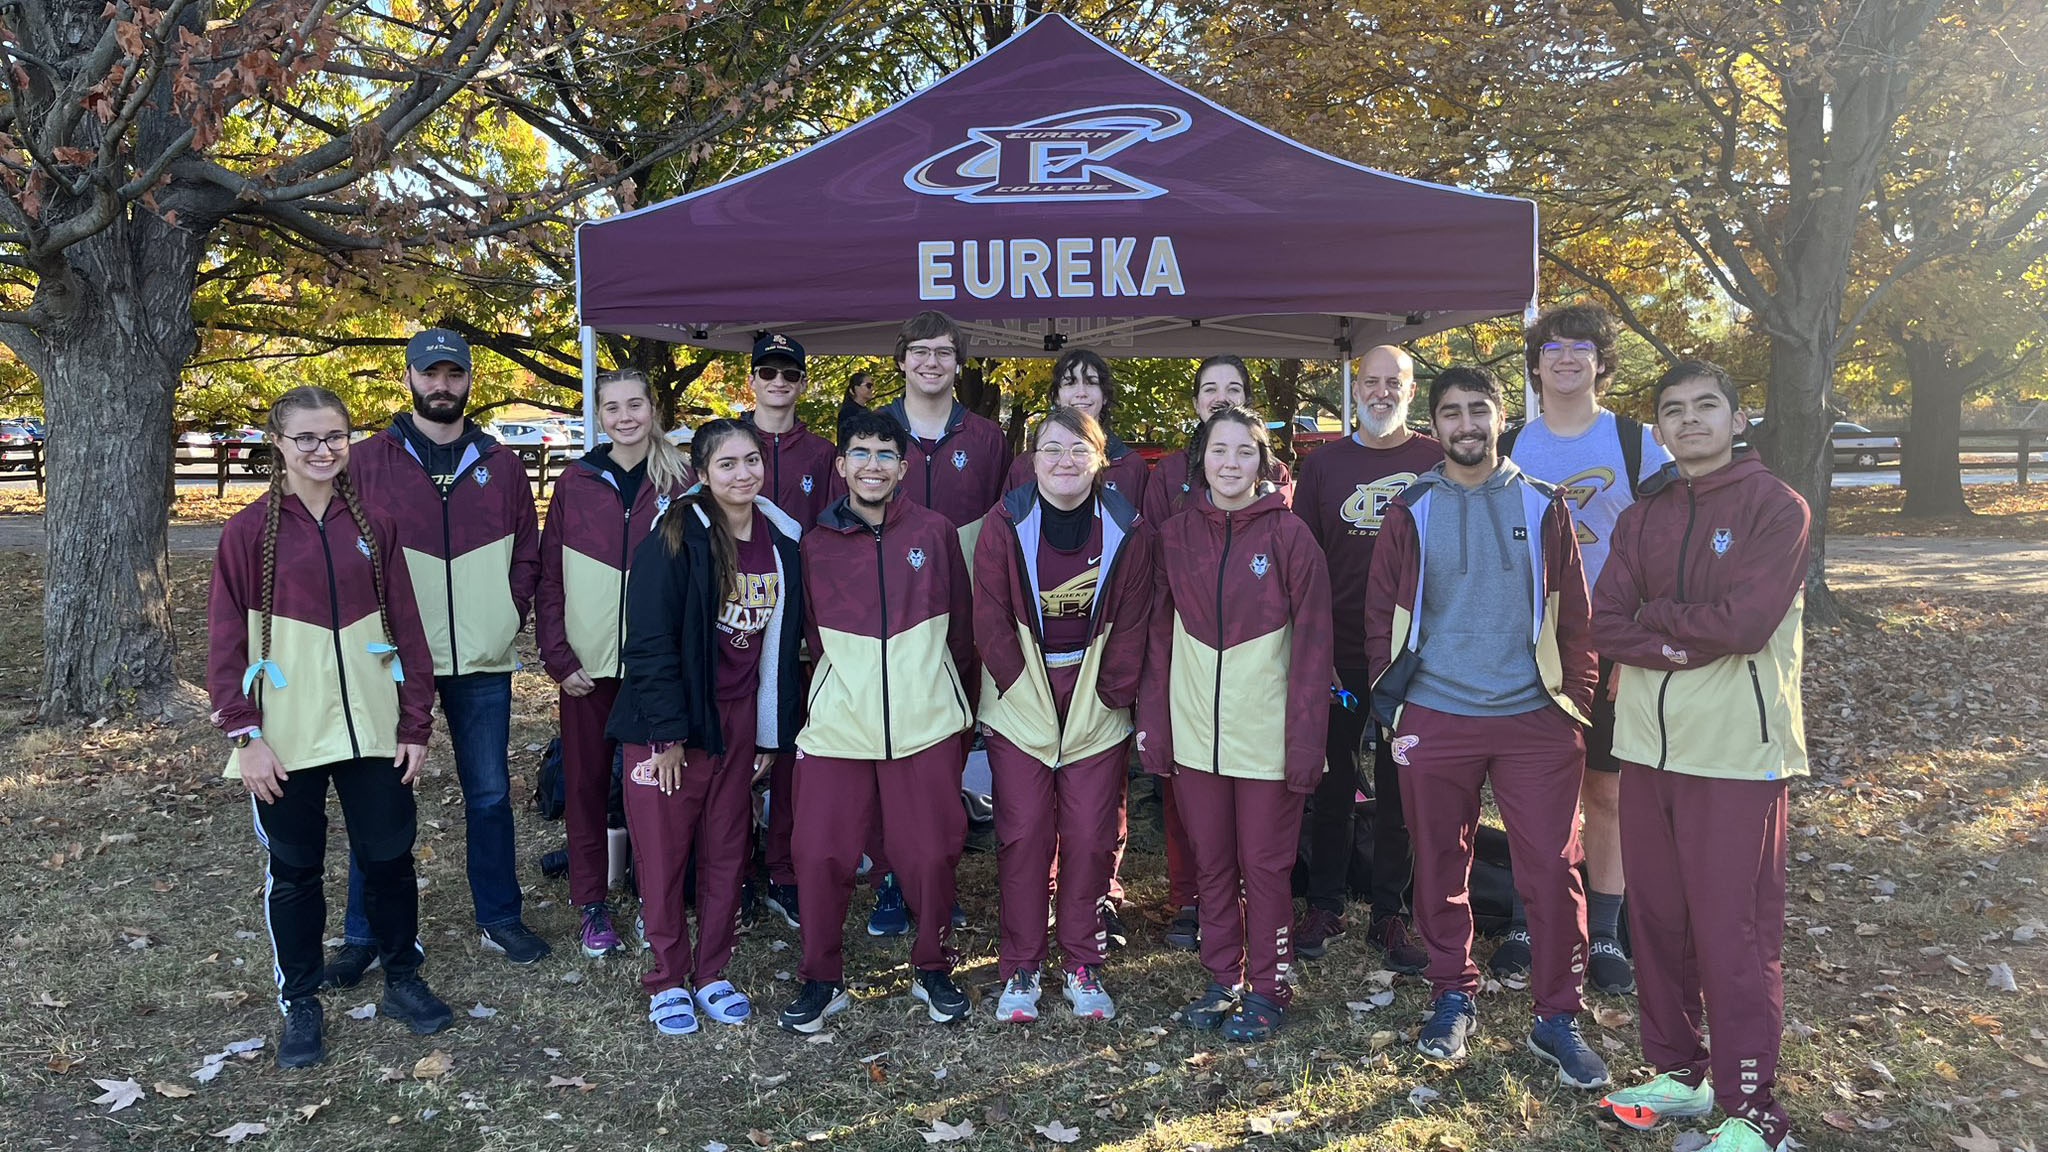 EC Cross Country Leveled Up During Historic 2022 Season